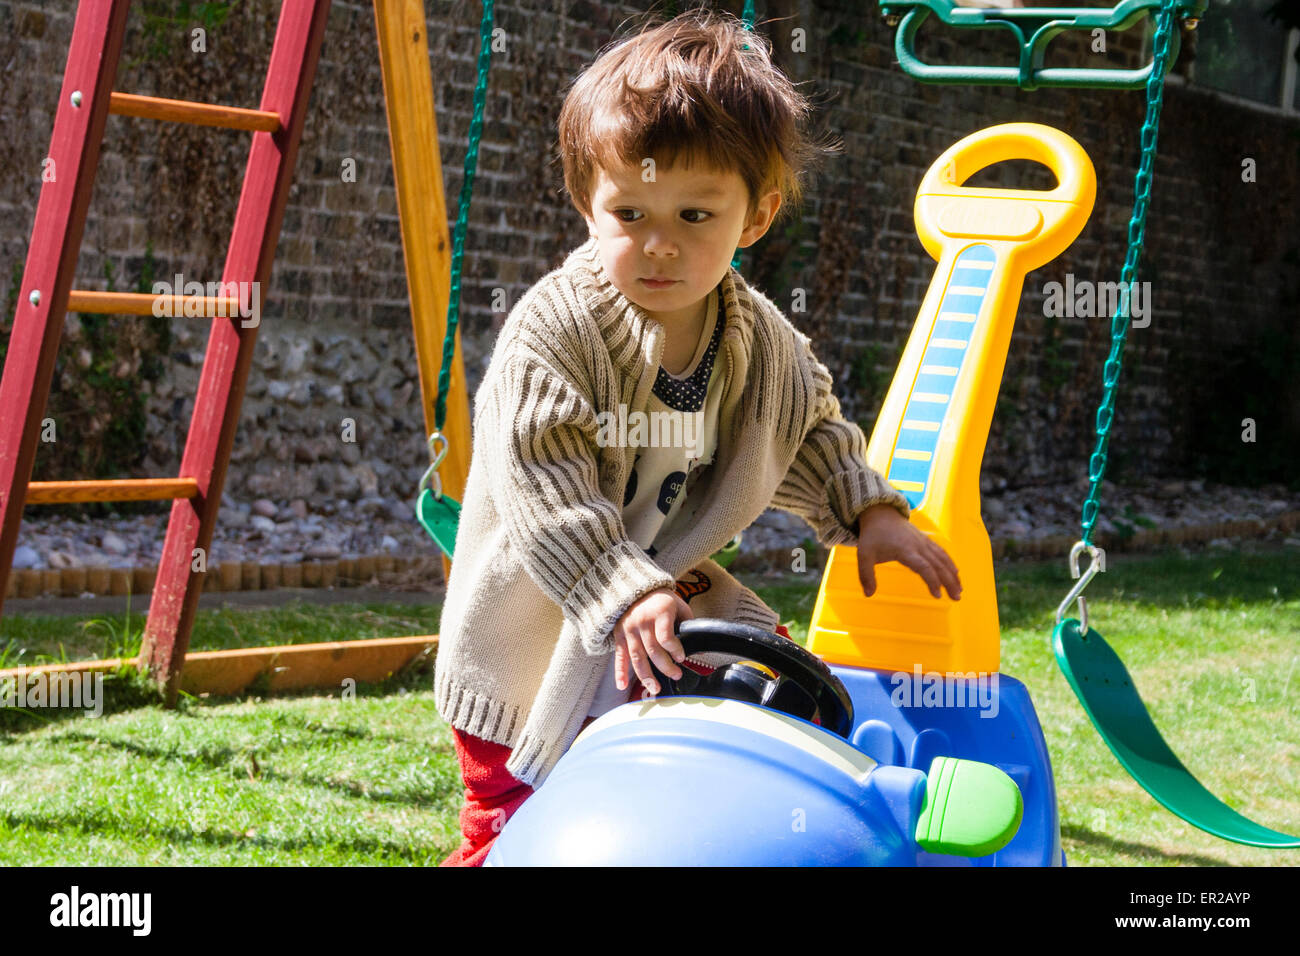 Child, boy, 4-5 year old, wearing a cardigan and playing by pushing around a blue and yellow plastic sit in car in a garden on a sunny day. Stock Photo